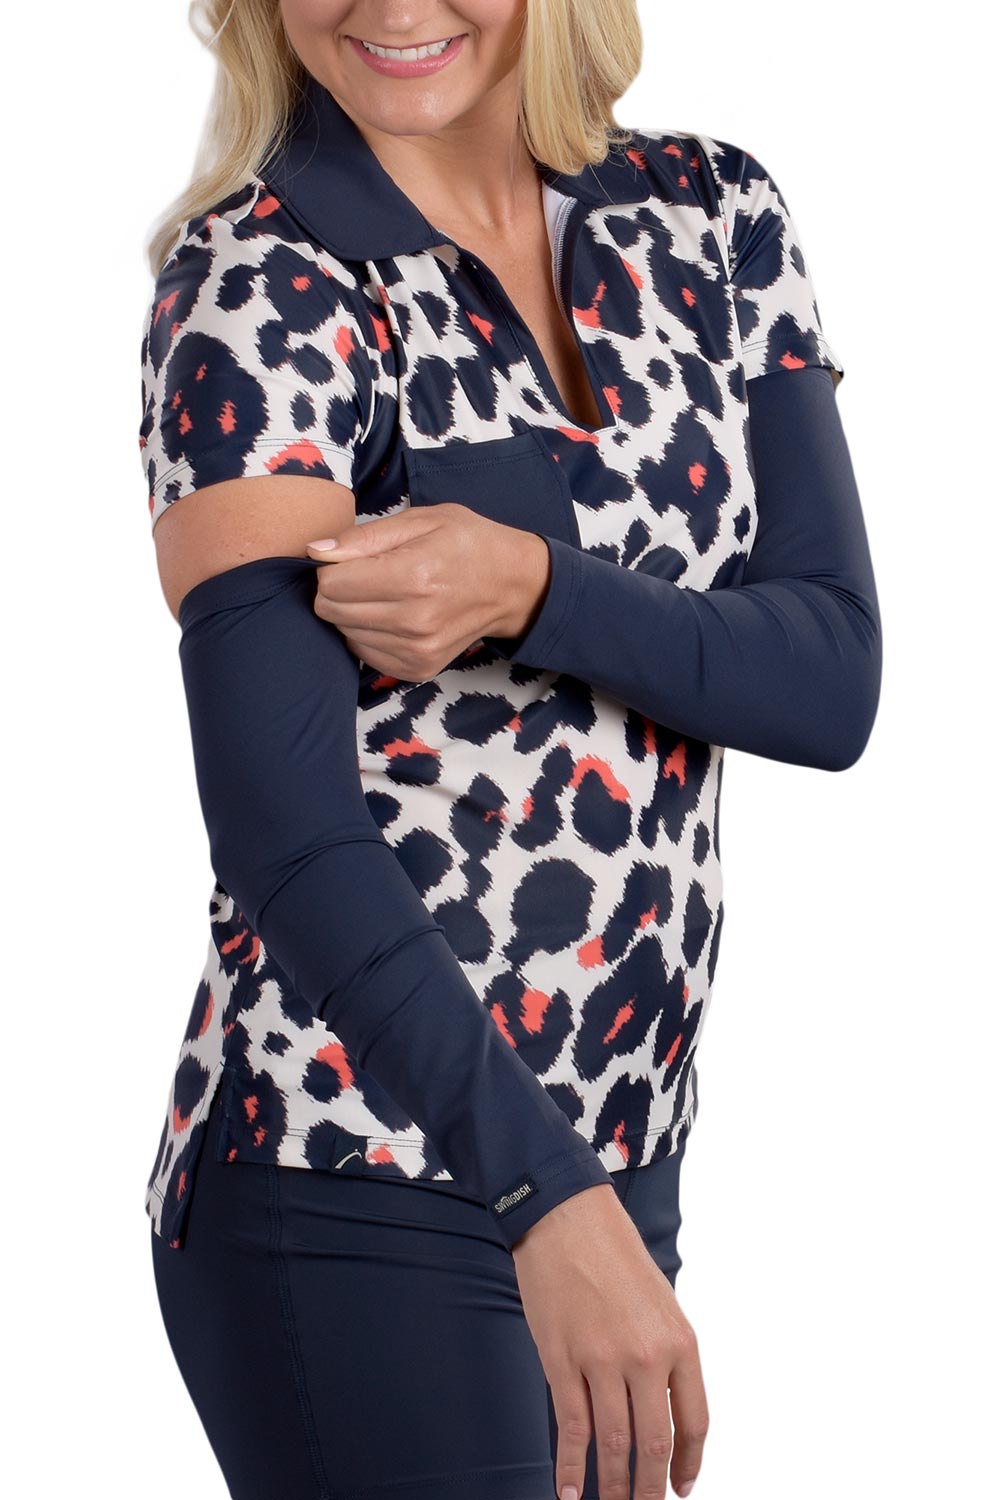 Sleeve It - SPF Arm Protection - Navy